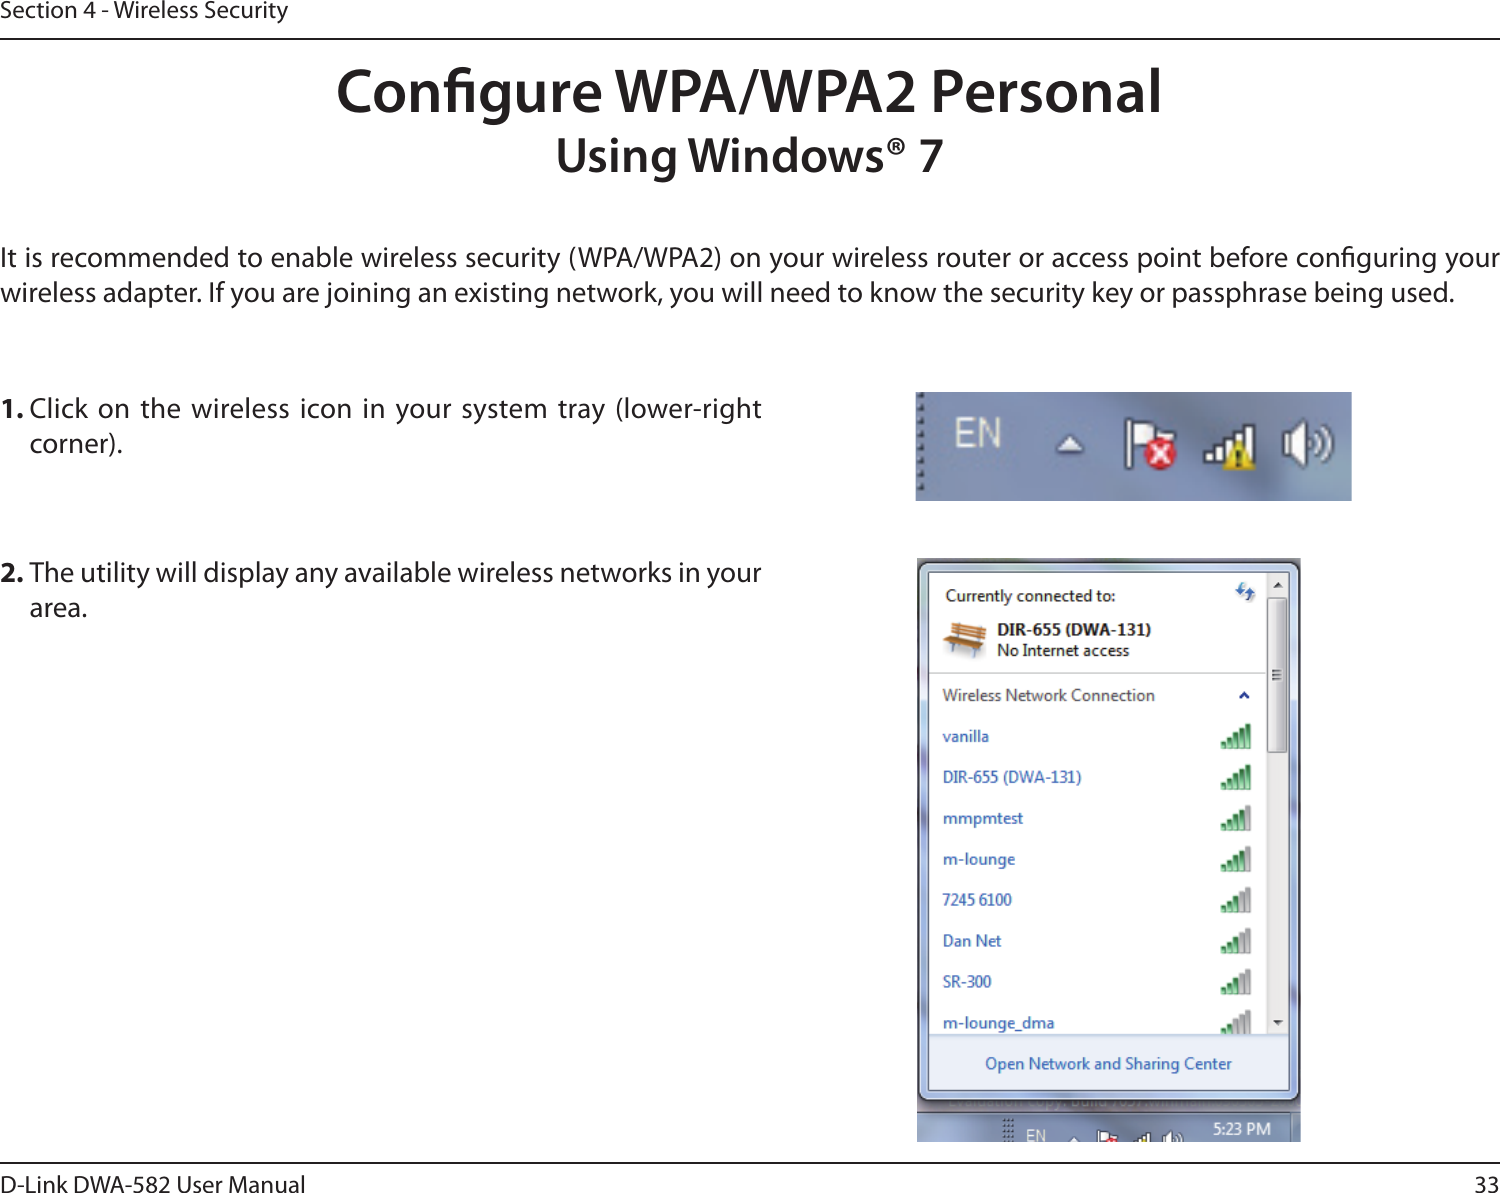 33D-Link DWA-582 User ManualSection 4 - Wireless SecurityCongure WPA/WPA2 PersonalUsing Windows® 7It is recommended to enable wireless security (WPA/WPA2) on your wireless router or access point before conguring your wireless adapter. If you are joining an existing network, you will need to know the security key or passphrase being used.2. The utility will display any available wireless networks in your area.1. Click on the wireless icon in your system tray (lower-right corner).